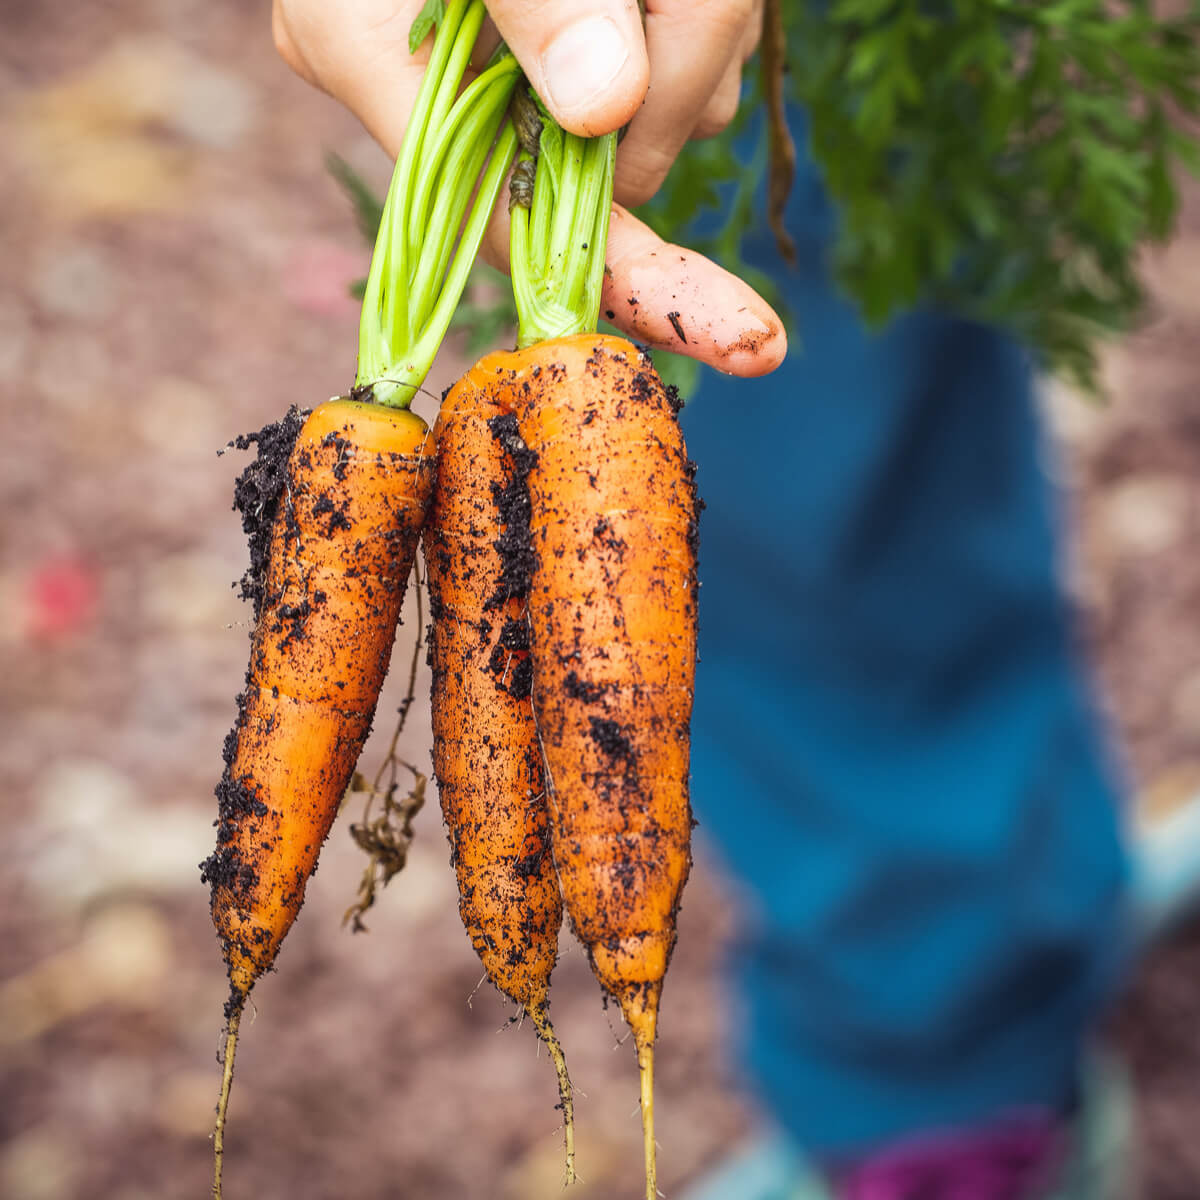 When to Harvest Carrots - Hand holding fresh-picked carrots - Photo by Markus Spiske from Pexels